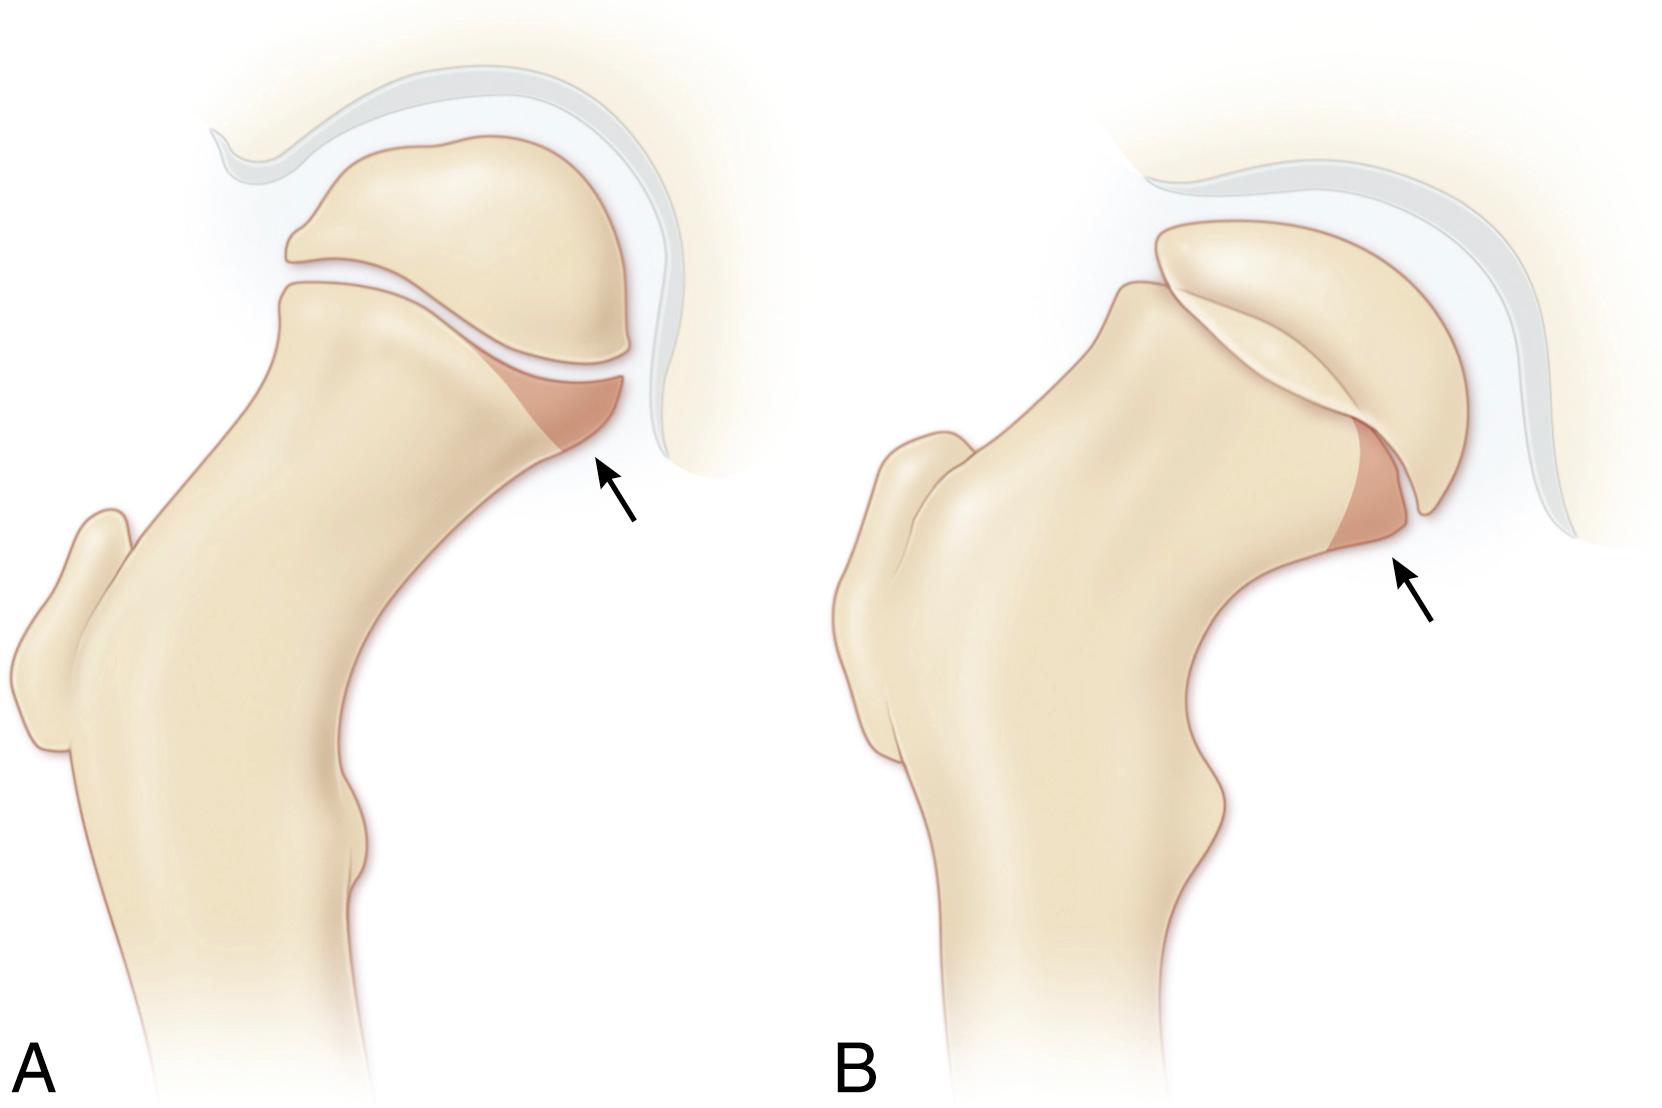 FIG. 15.8, Scham sign of slipped capital femoral epiphysis. (A) In the normal hip, the inferomedial femoral neck overlaps the posterior wall of the acetabulum, producing a triangular radiographic density on the anteroposterior view. (B) With displacement of the capital epiphysis, this dense triangle is lost because this portion of the femoral neck is located lateral to the acetabulum.